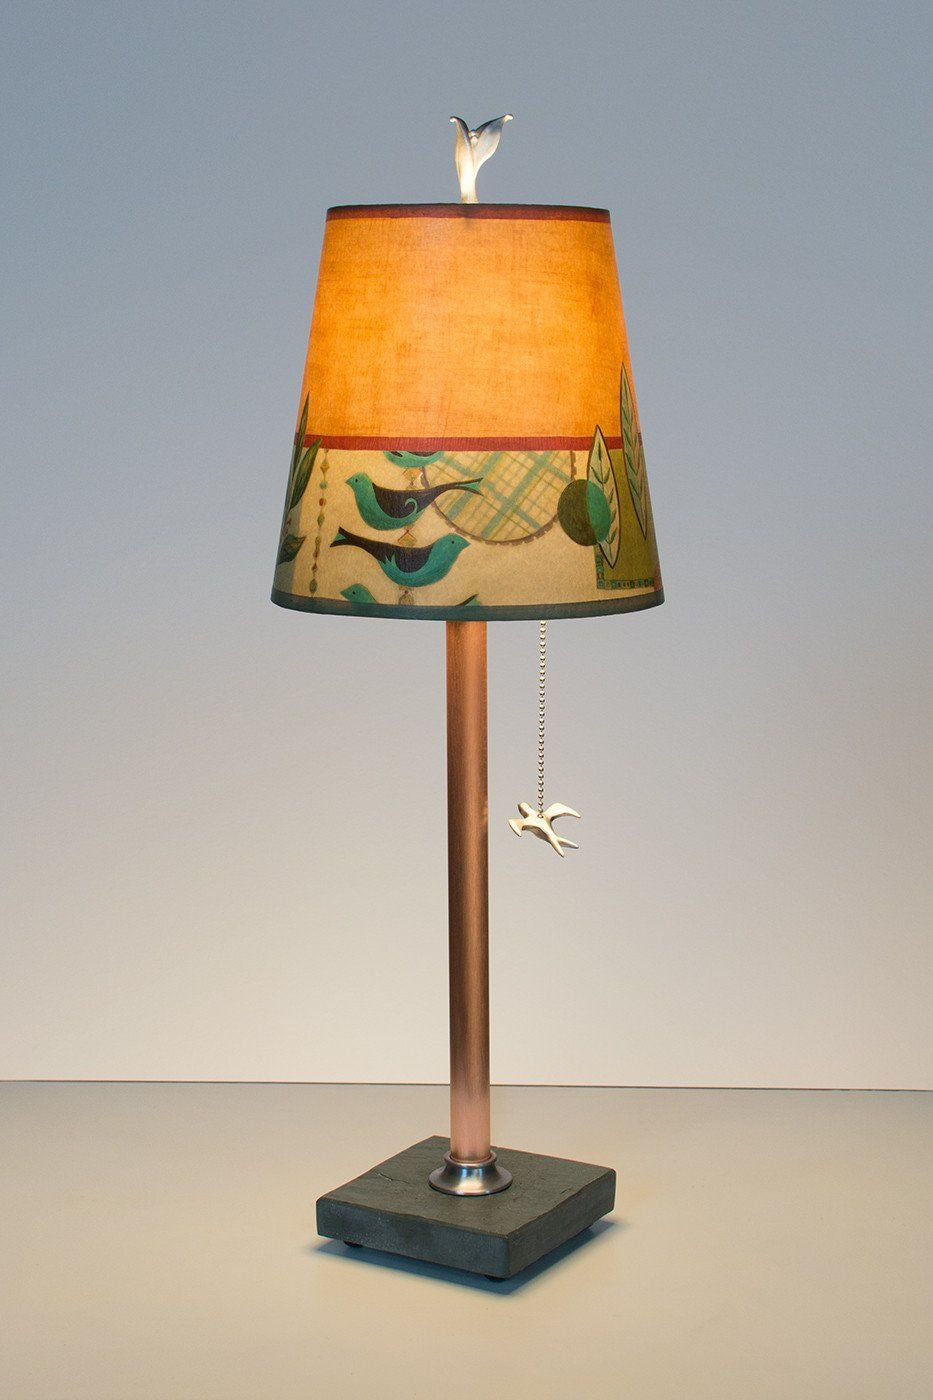 Copper Table Lamp on Vermont Slate Base with Small Drum Shade in New Capri Spice Lit